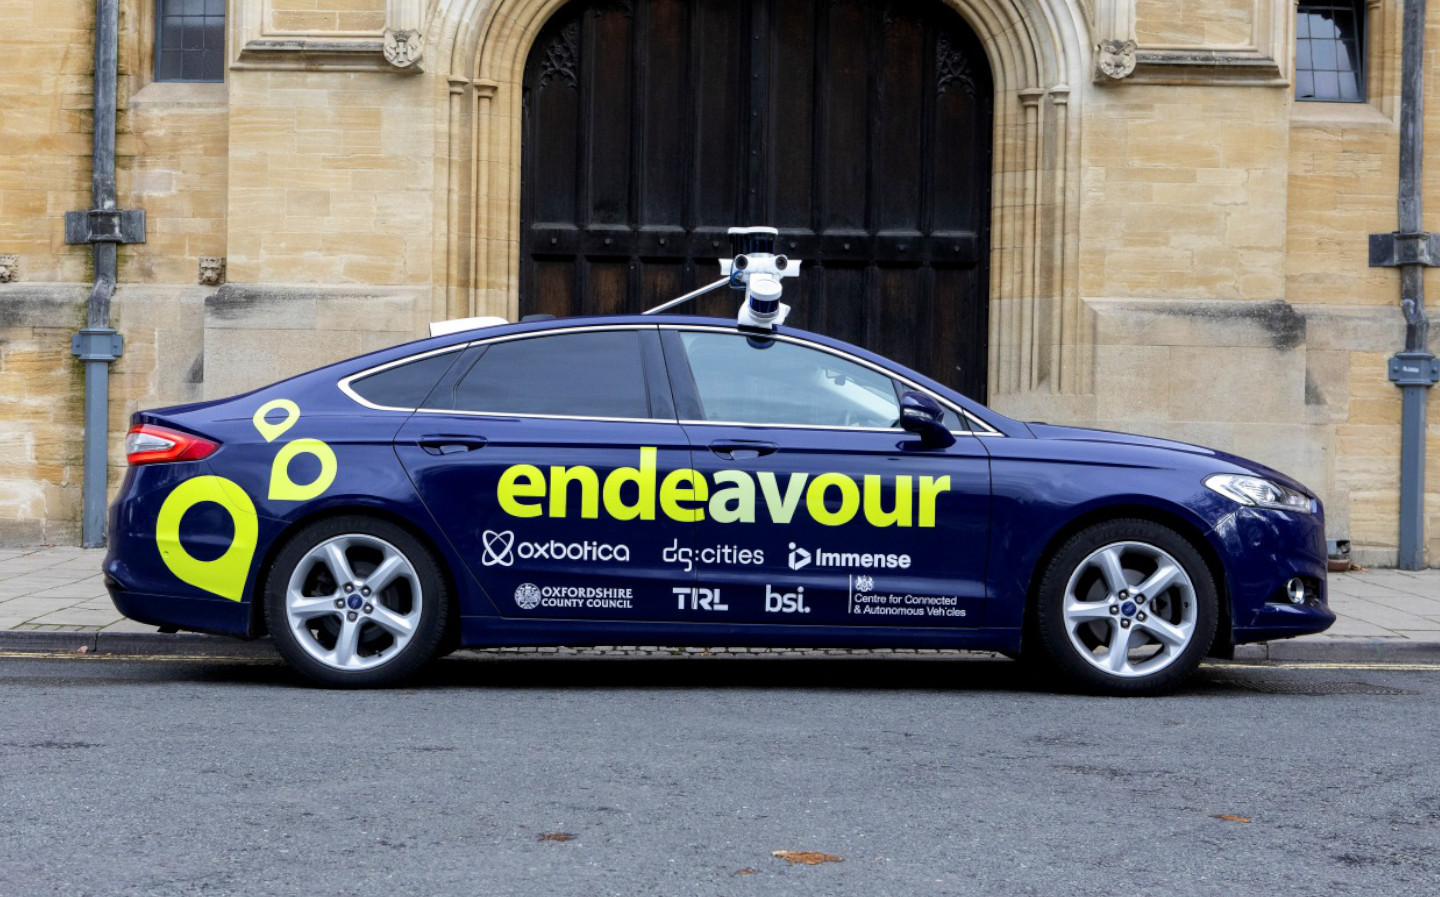 Self-driving car trials launch in Oxford